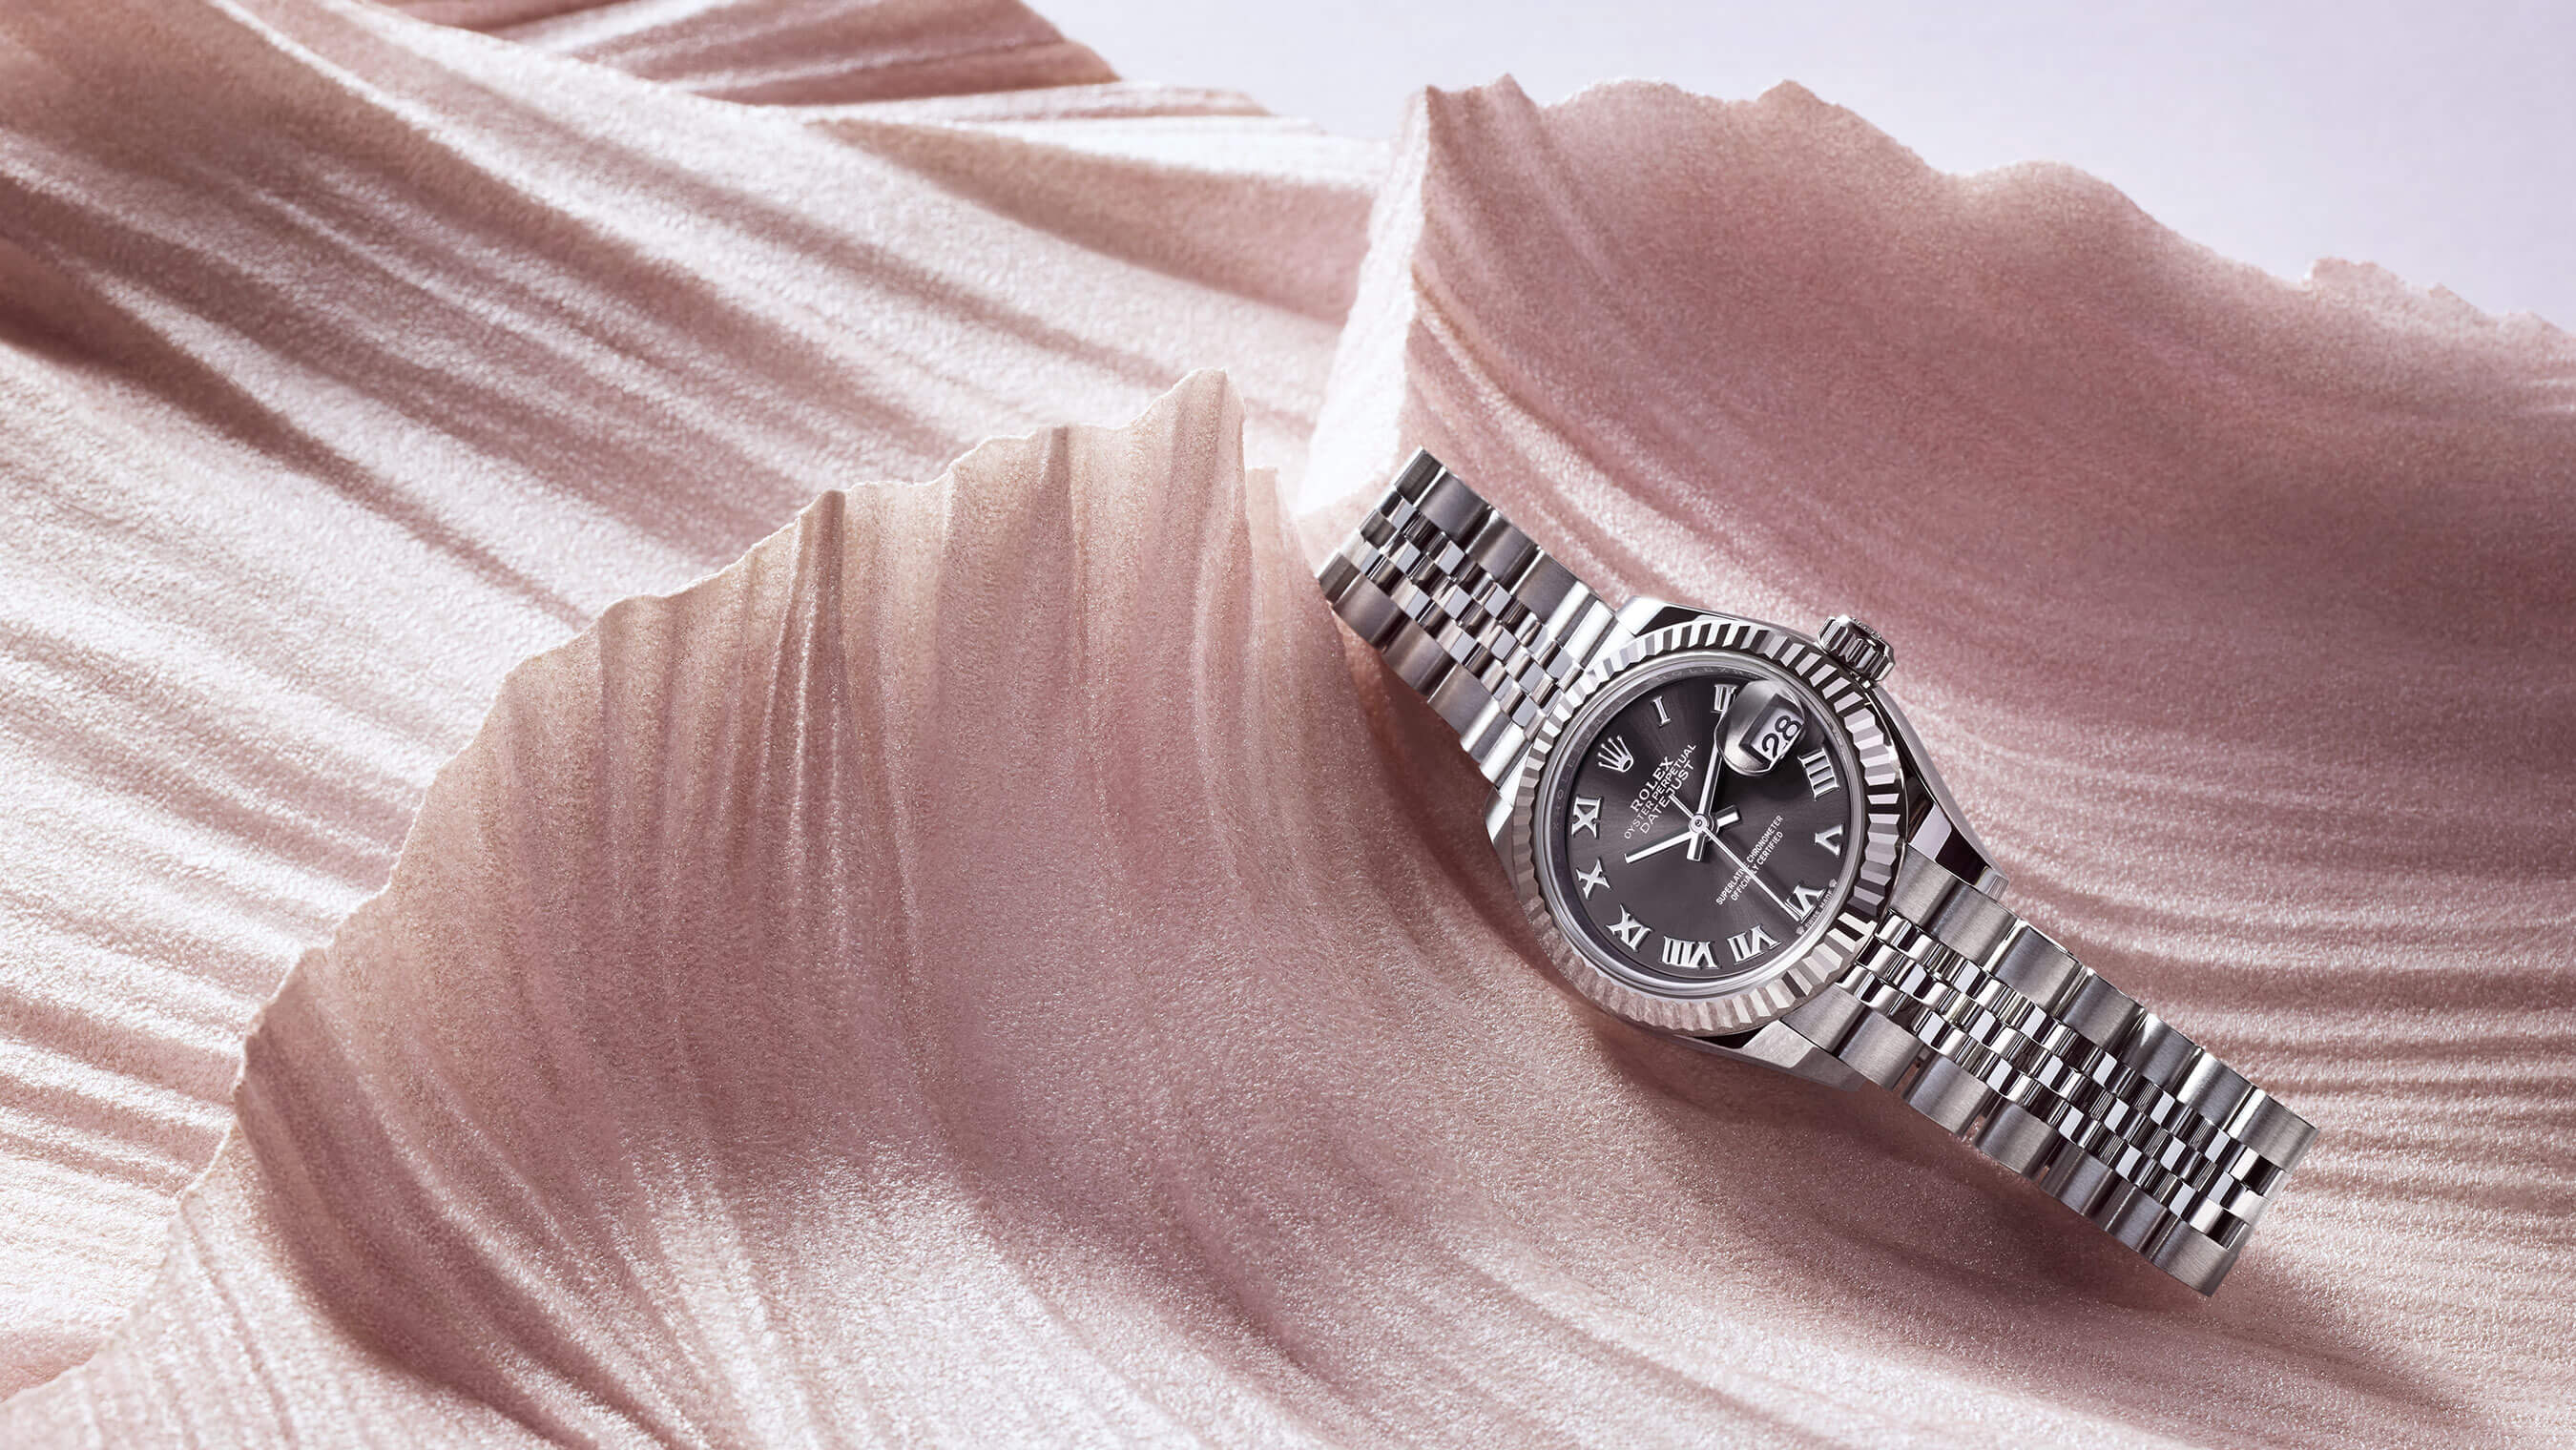 Rolex Lady-Datejust: The Quintessence of Timeless Elegance